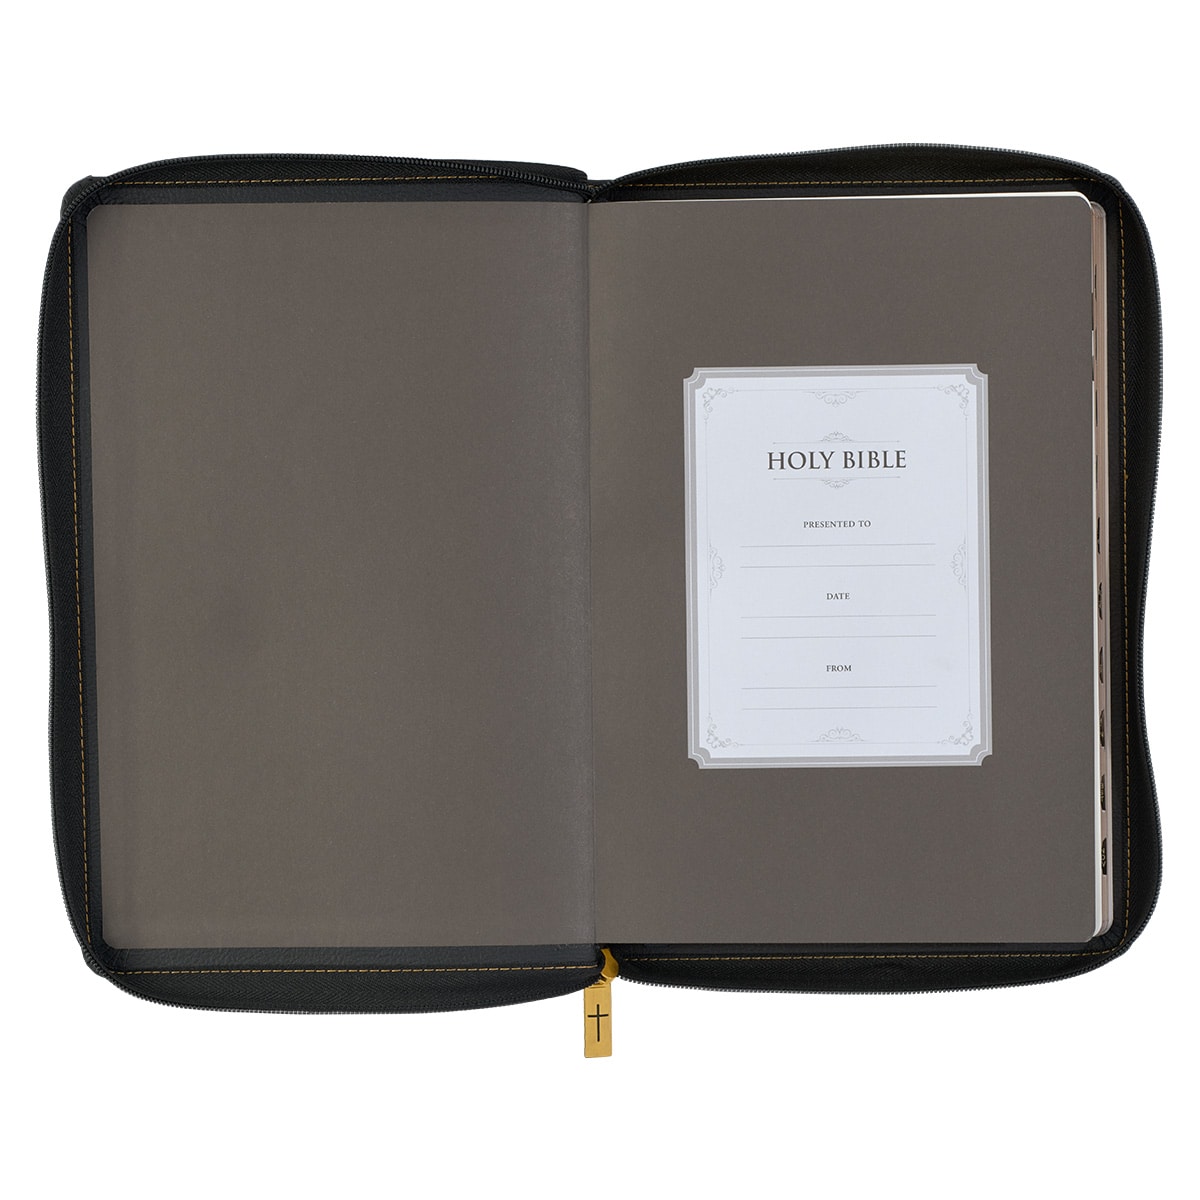 Black Faux Leather Large Print Thinline KJV Bible with Thumb Index and  Zippered Closure - KJV Bibles